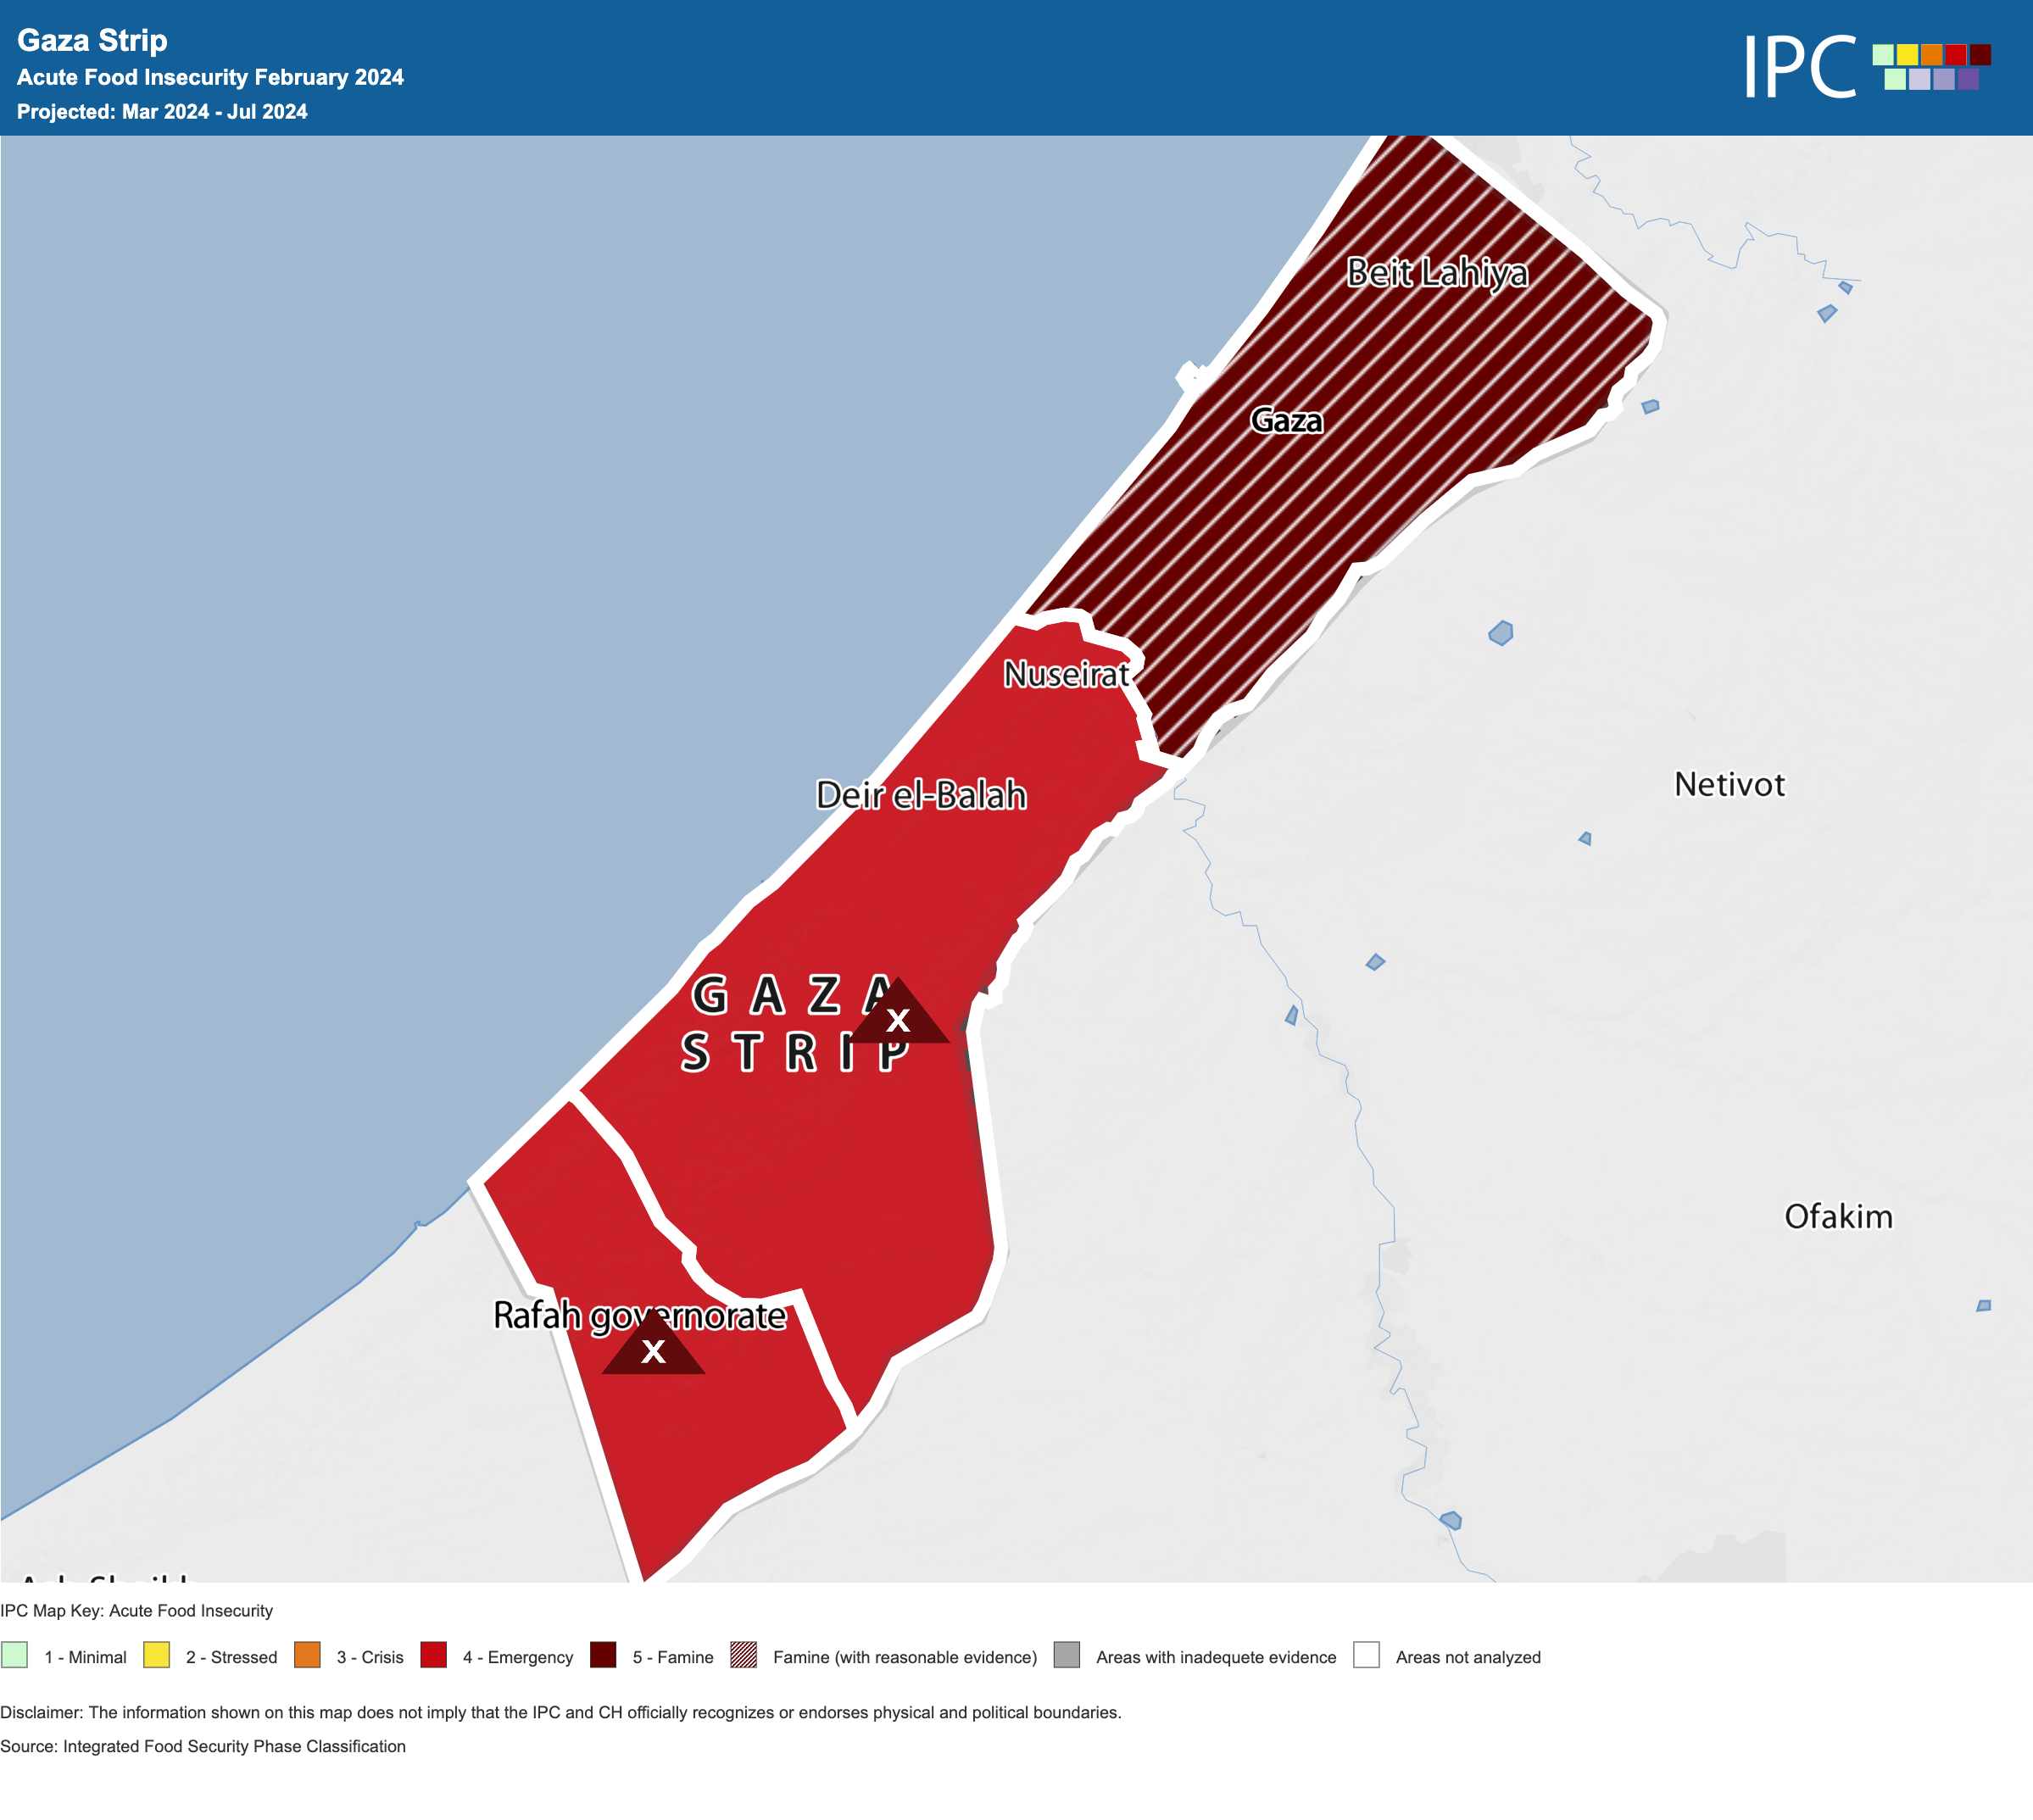 The last IPC report on Acute Food Insecurity for Gaza included this projection for the period 16 March - 15 July 2024. The dark red shows the area projected to experience famine. The lighter red shows areas experiencing an “emergency” level of food insecurity and at risk of famine